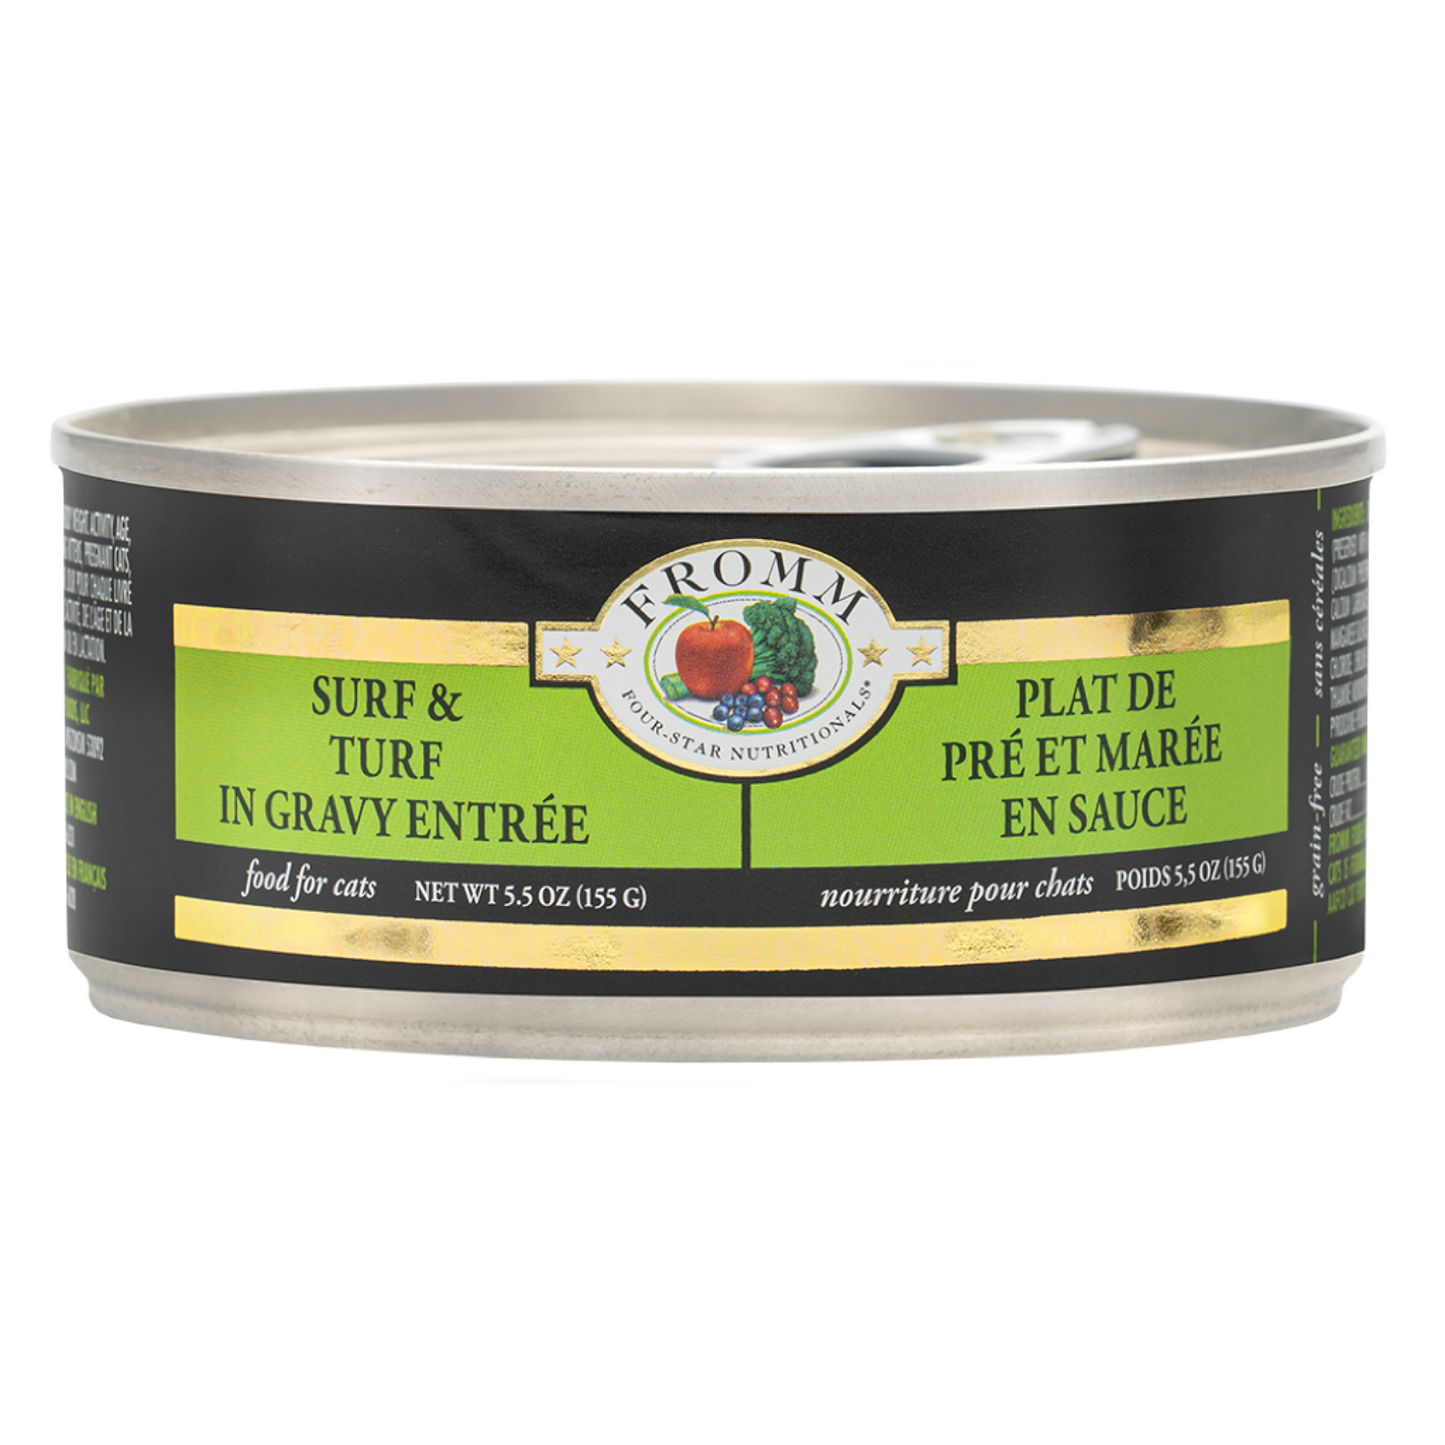 FROMM® FOUR STAR NUTRITIONALS® SURF & TURF IN GRAVY ENTRÉE WET CAT FOOD